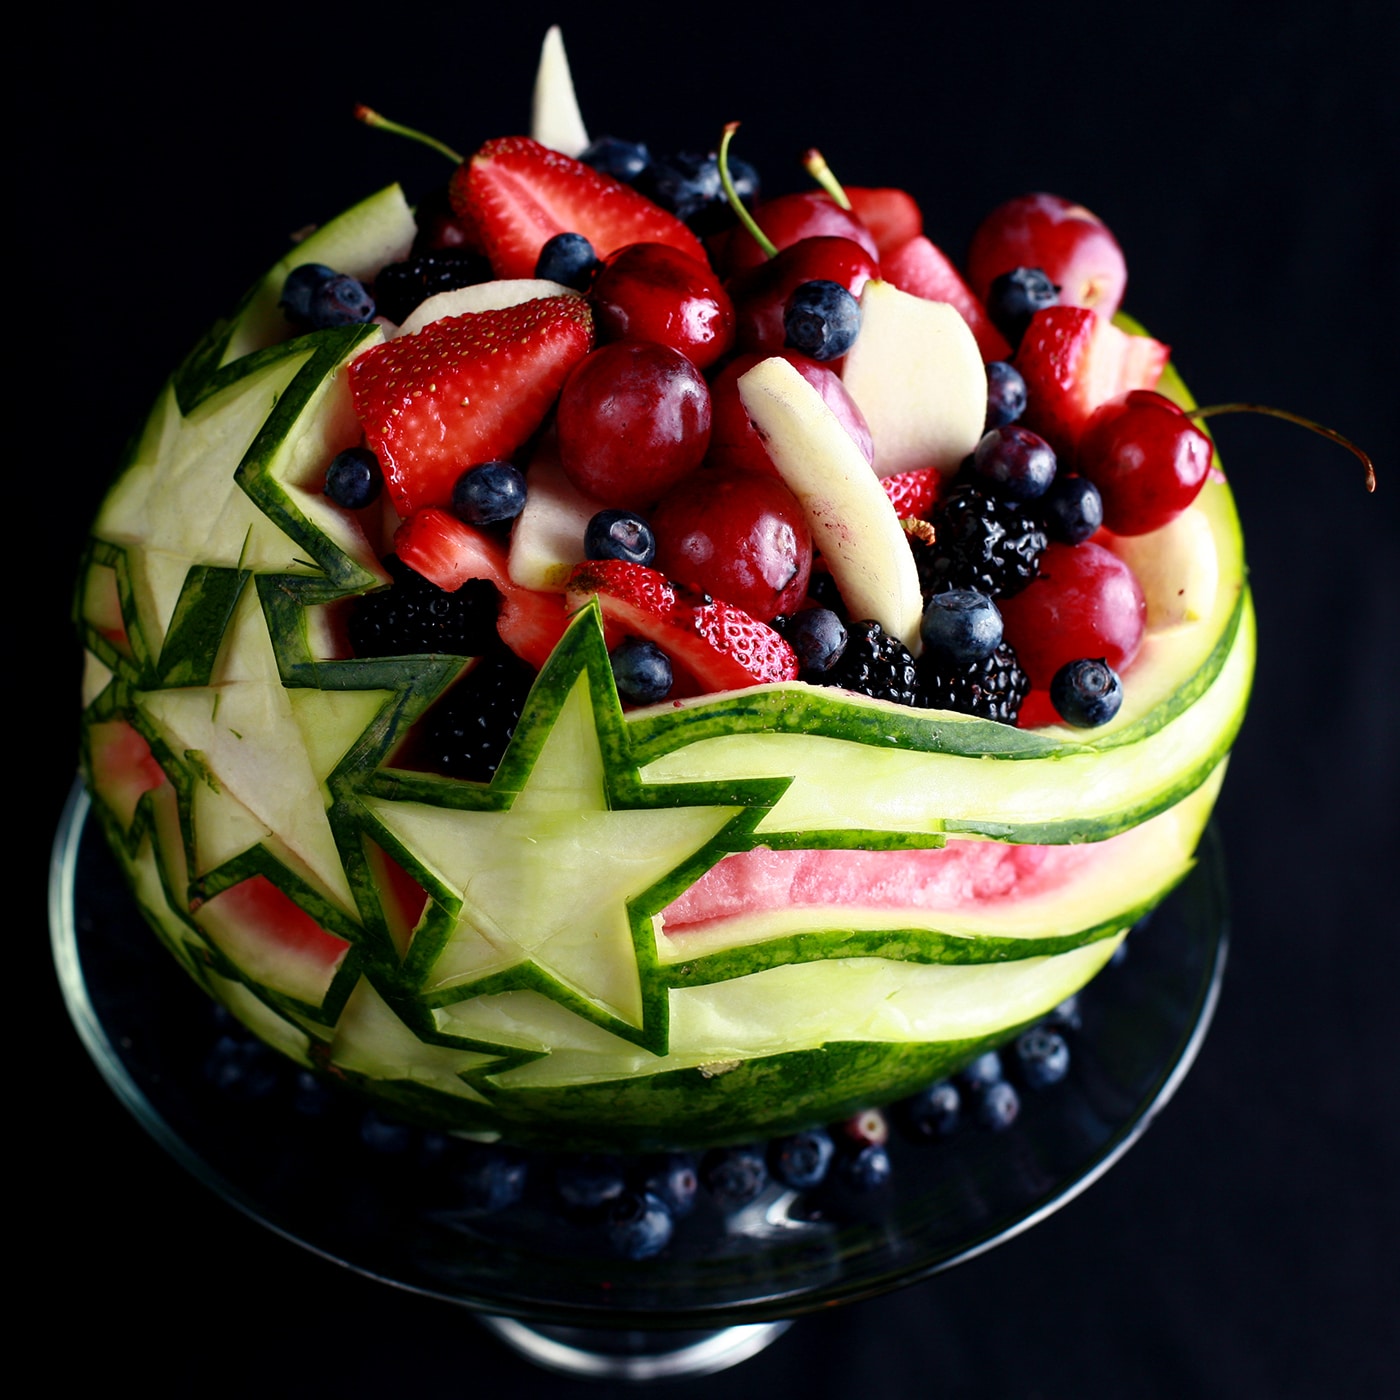 An Independence Day Watermelon Bowl. It is carved with a stars and stripes design, and filled with red, white, and blue fruit.